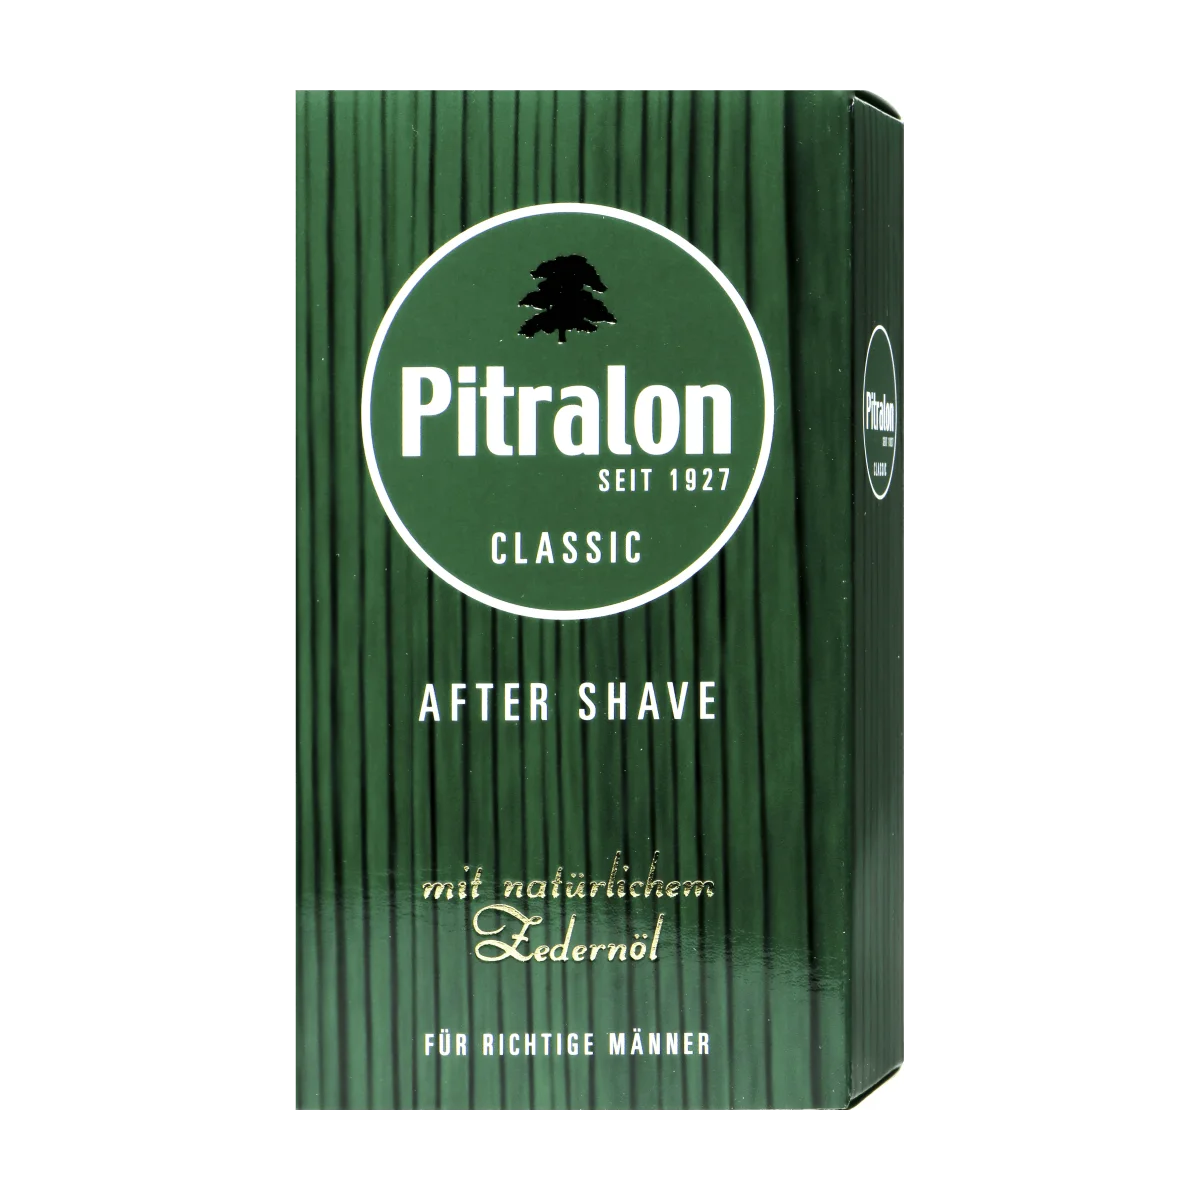 Pitralon After Shave Classic, 100 ml